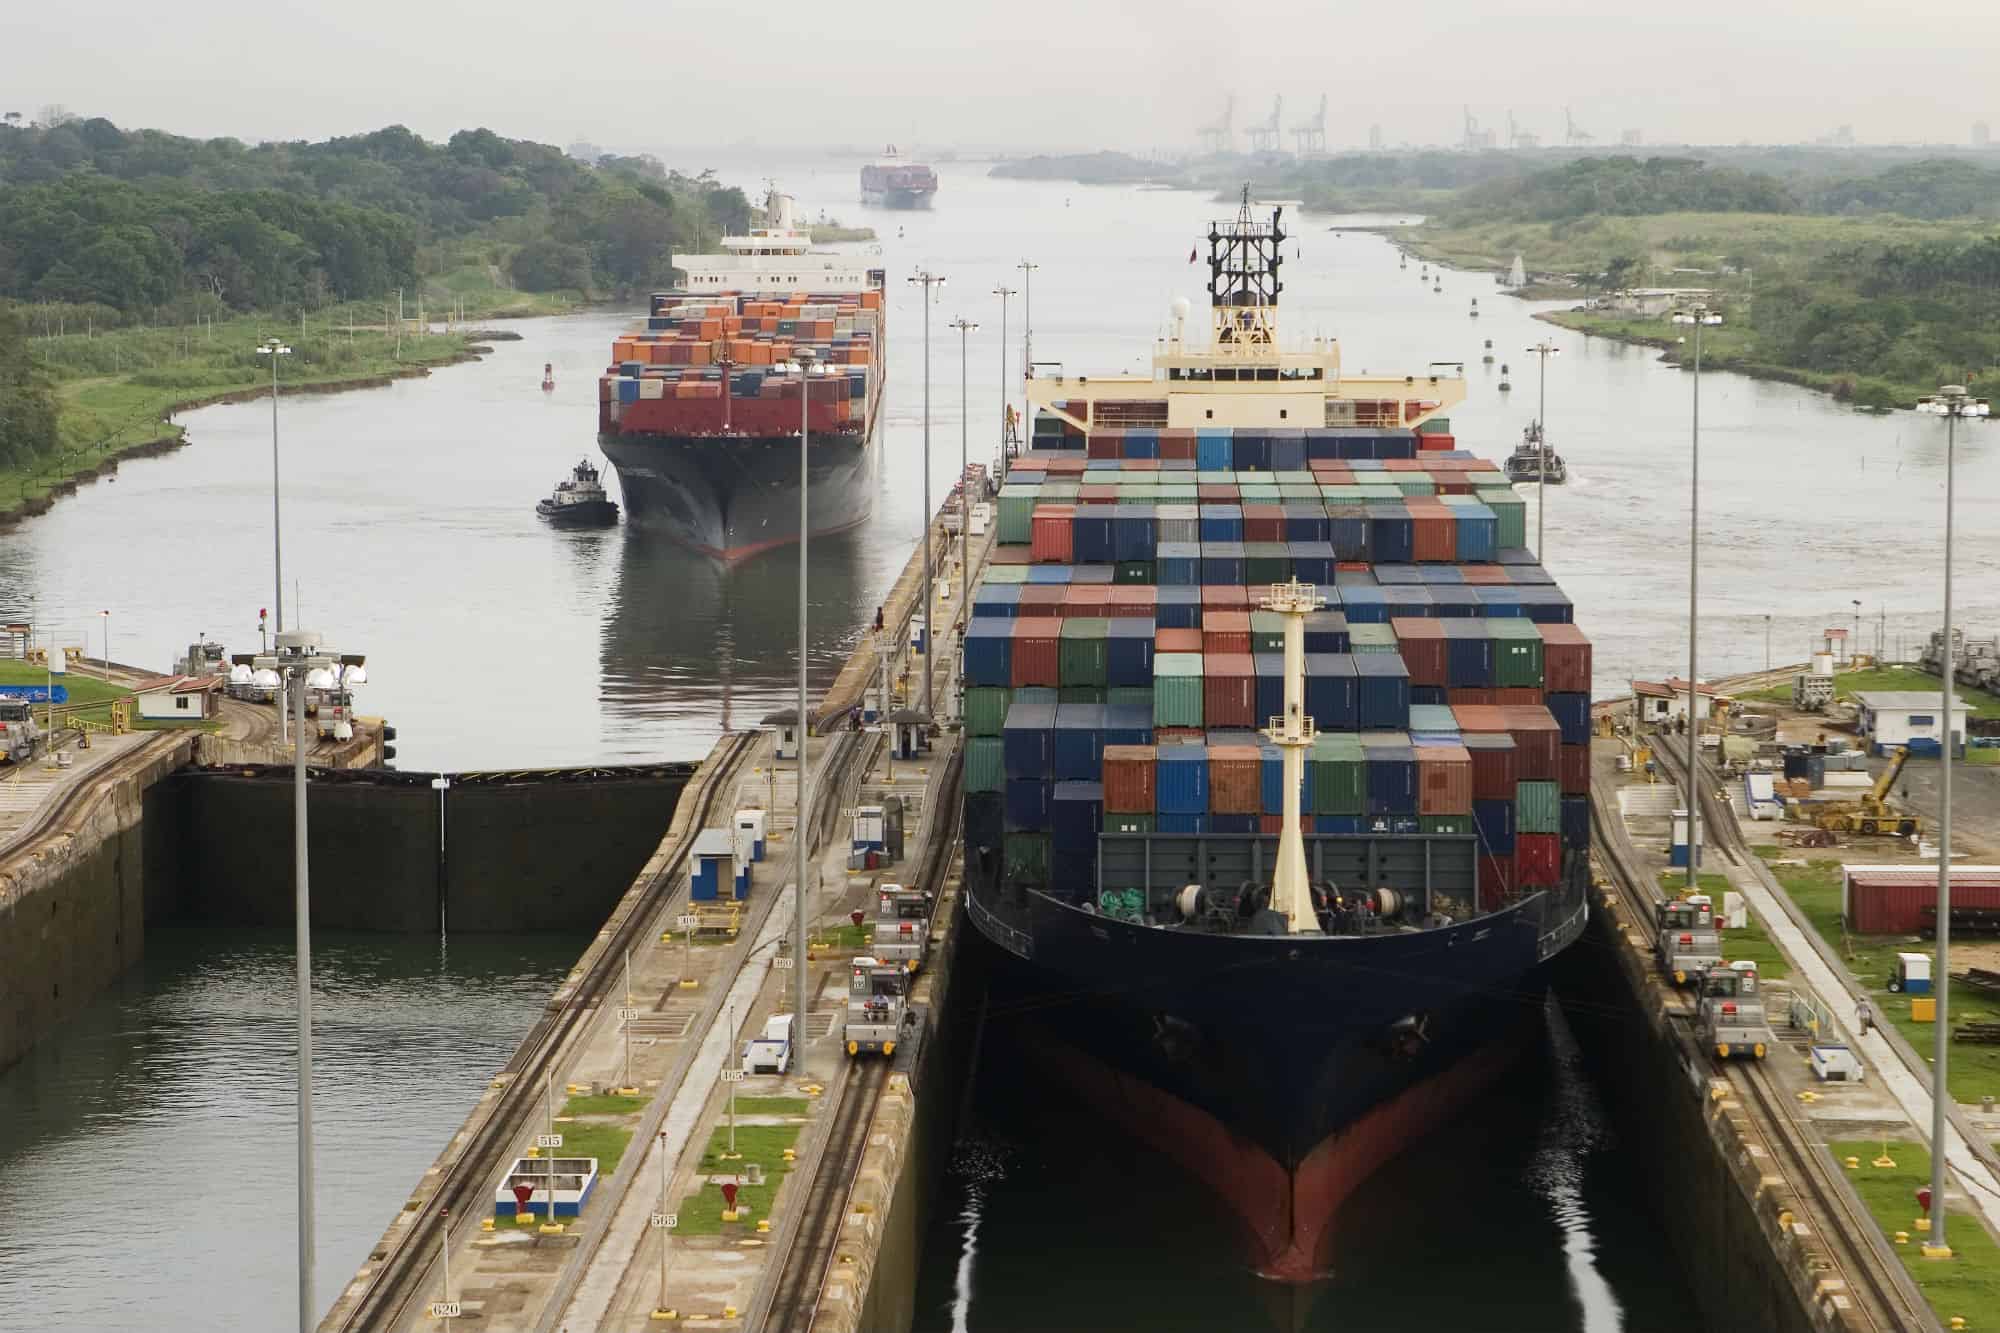 Container ship going through Panama canal lock